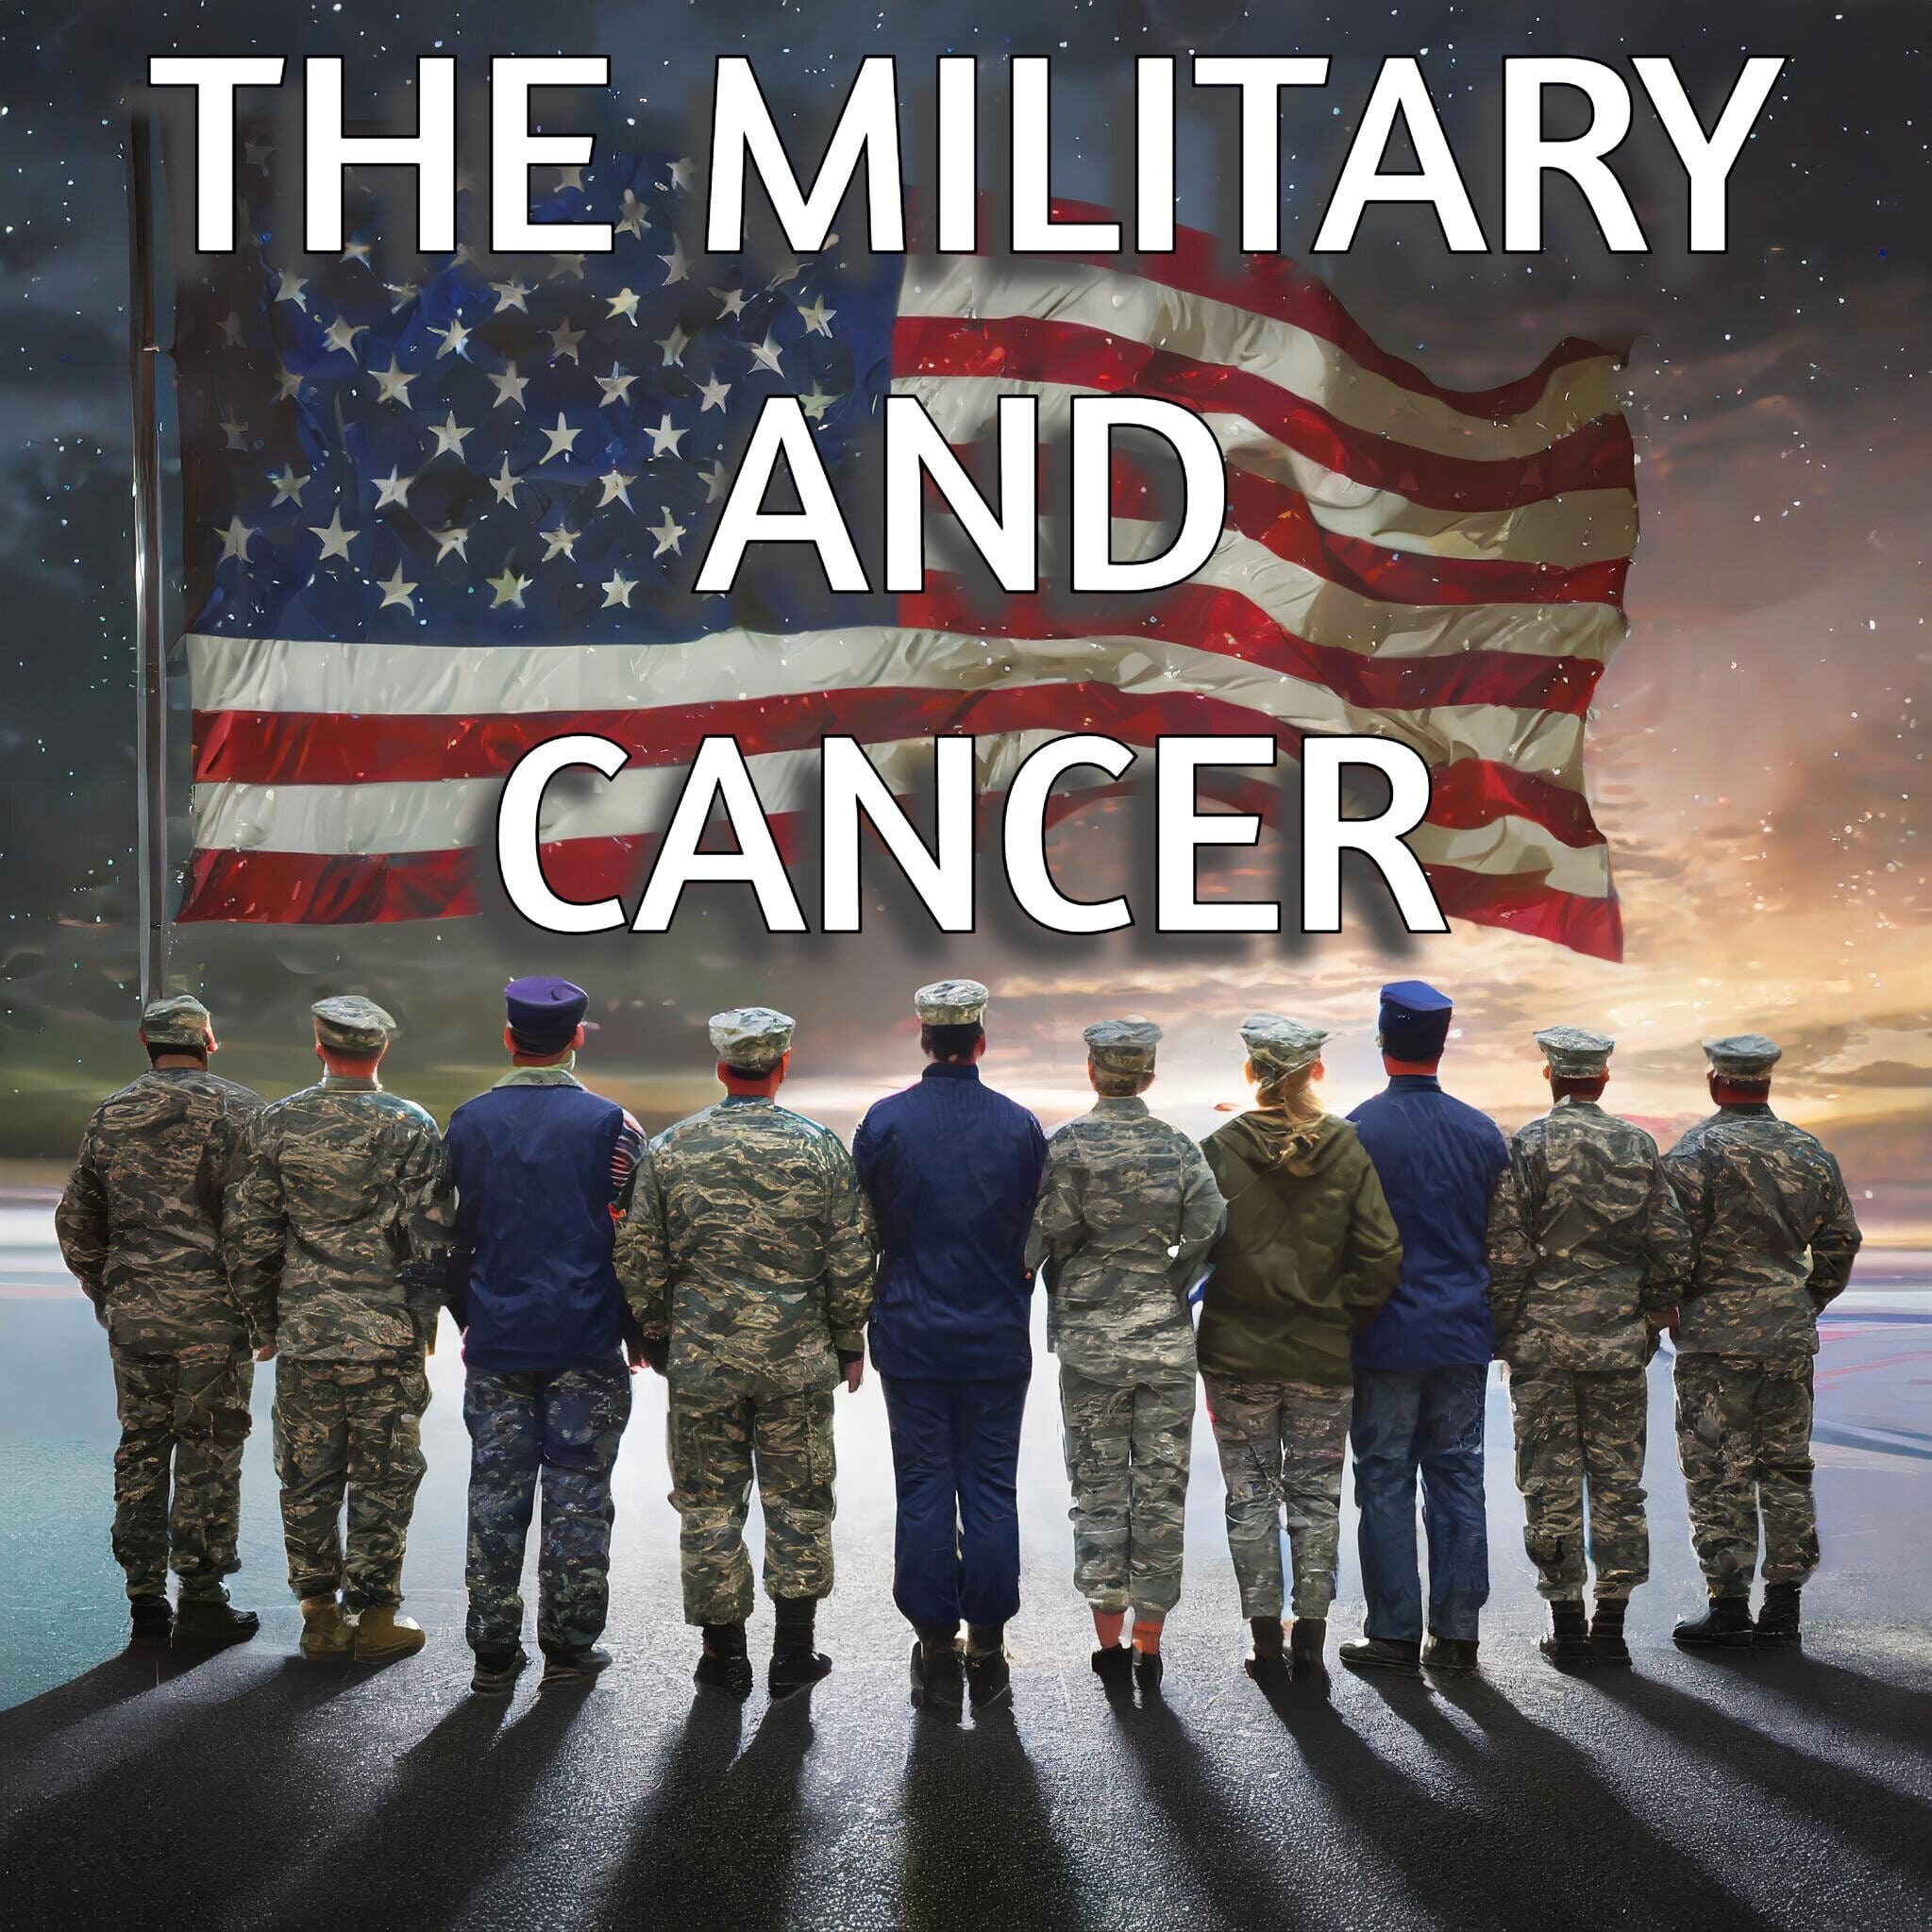 THE MILITARY AND CANCER